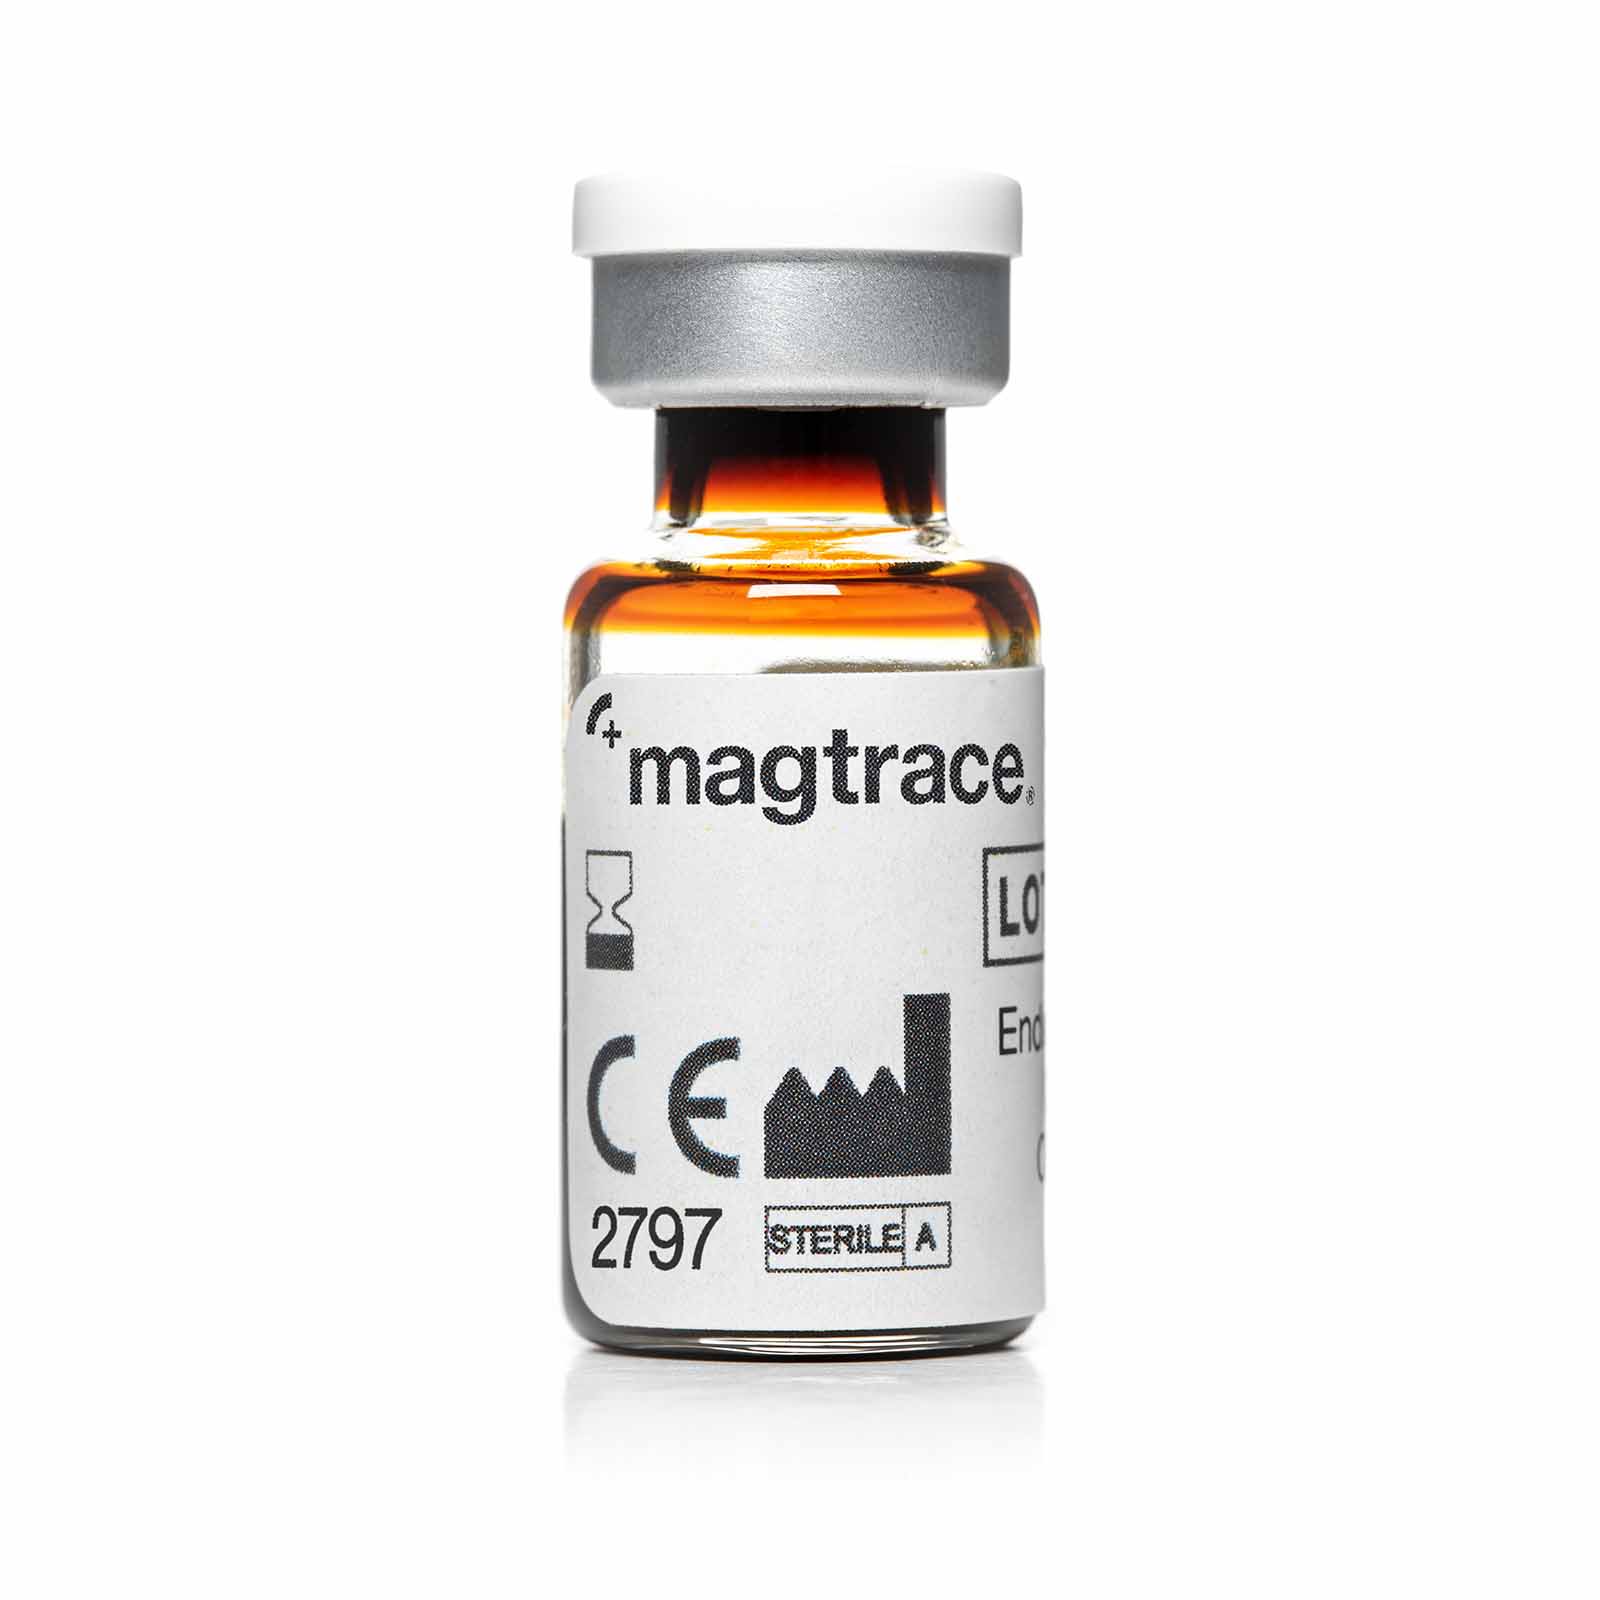 Magtrace vial